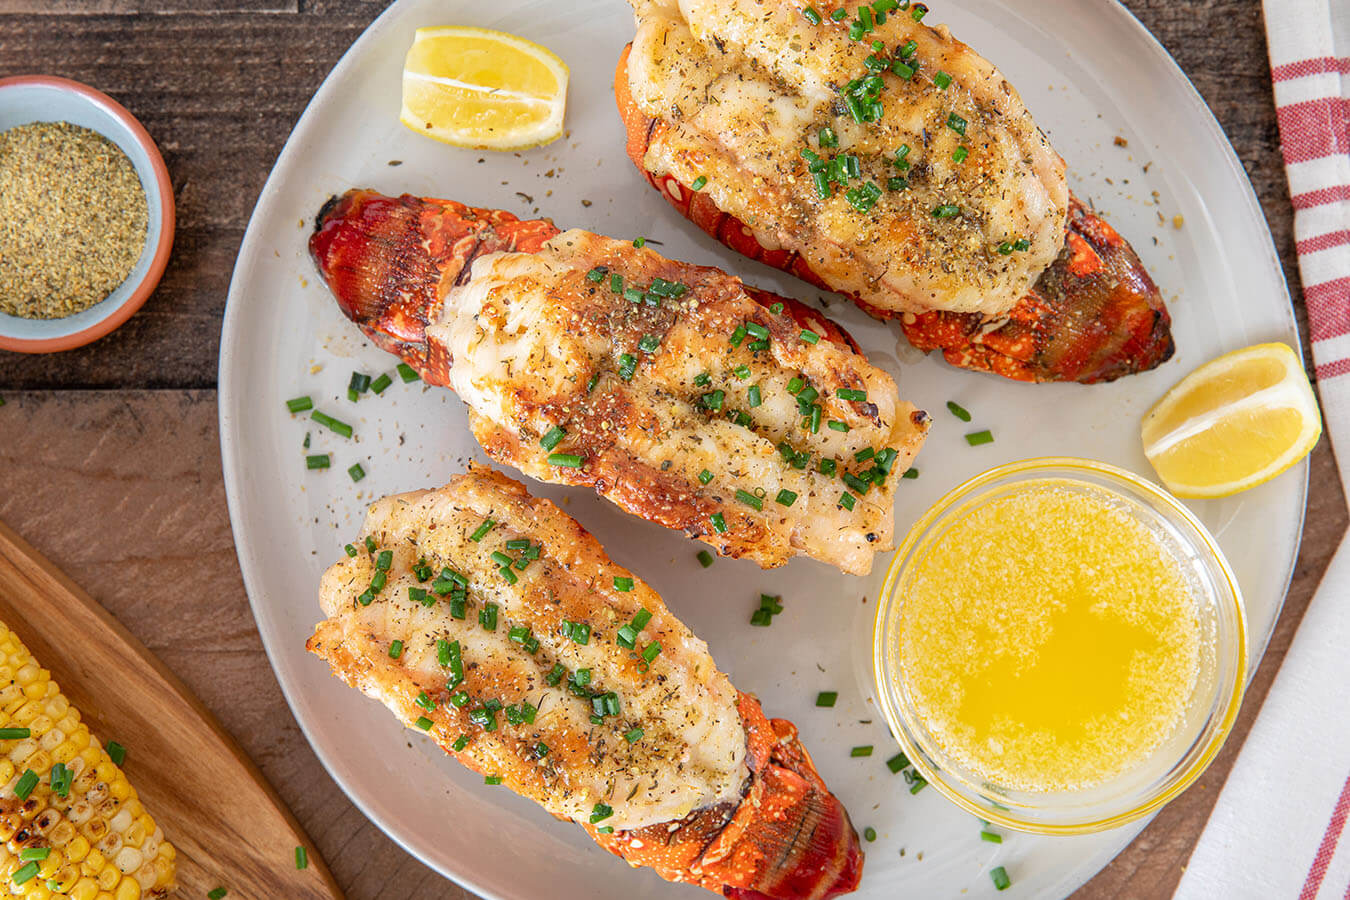 Weber's Grilled Lobster Tails with Garlic Parm Butter Recipe